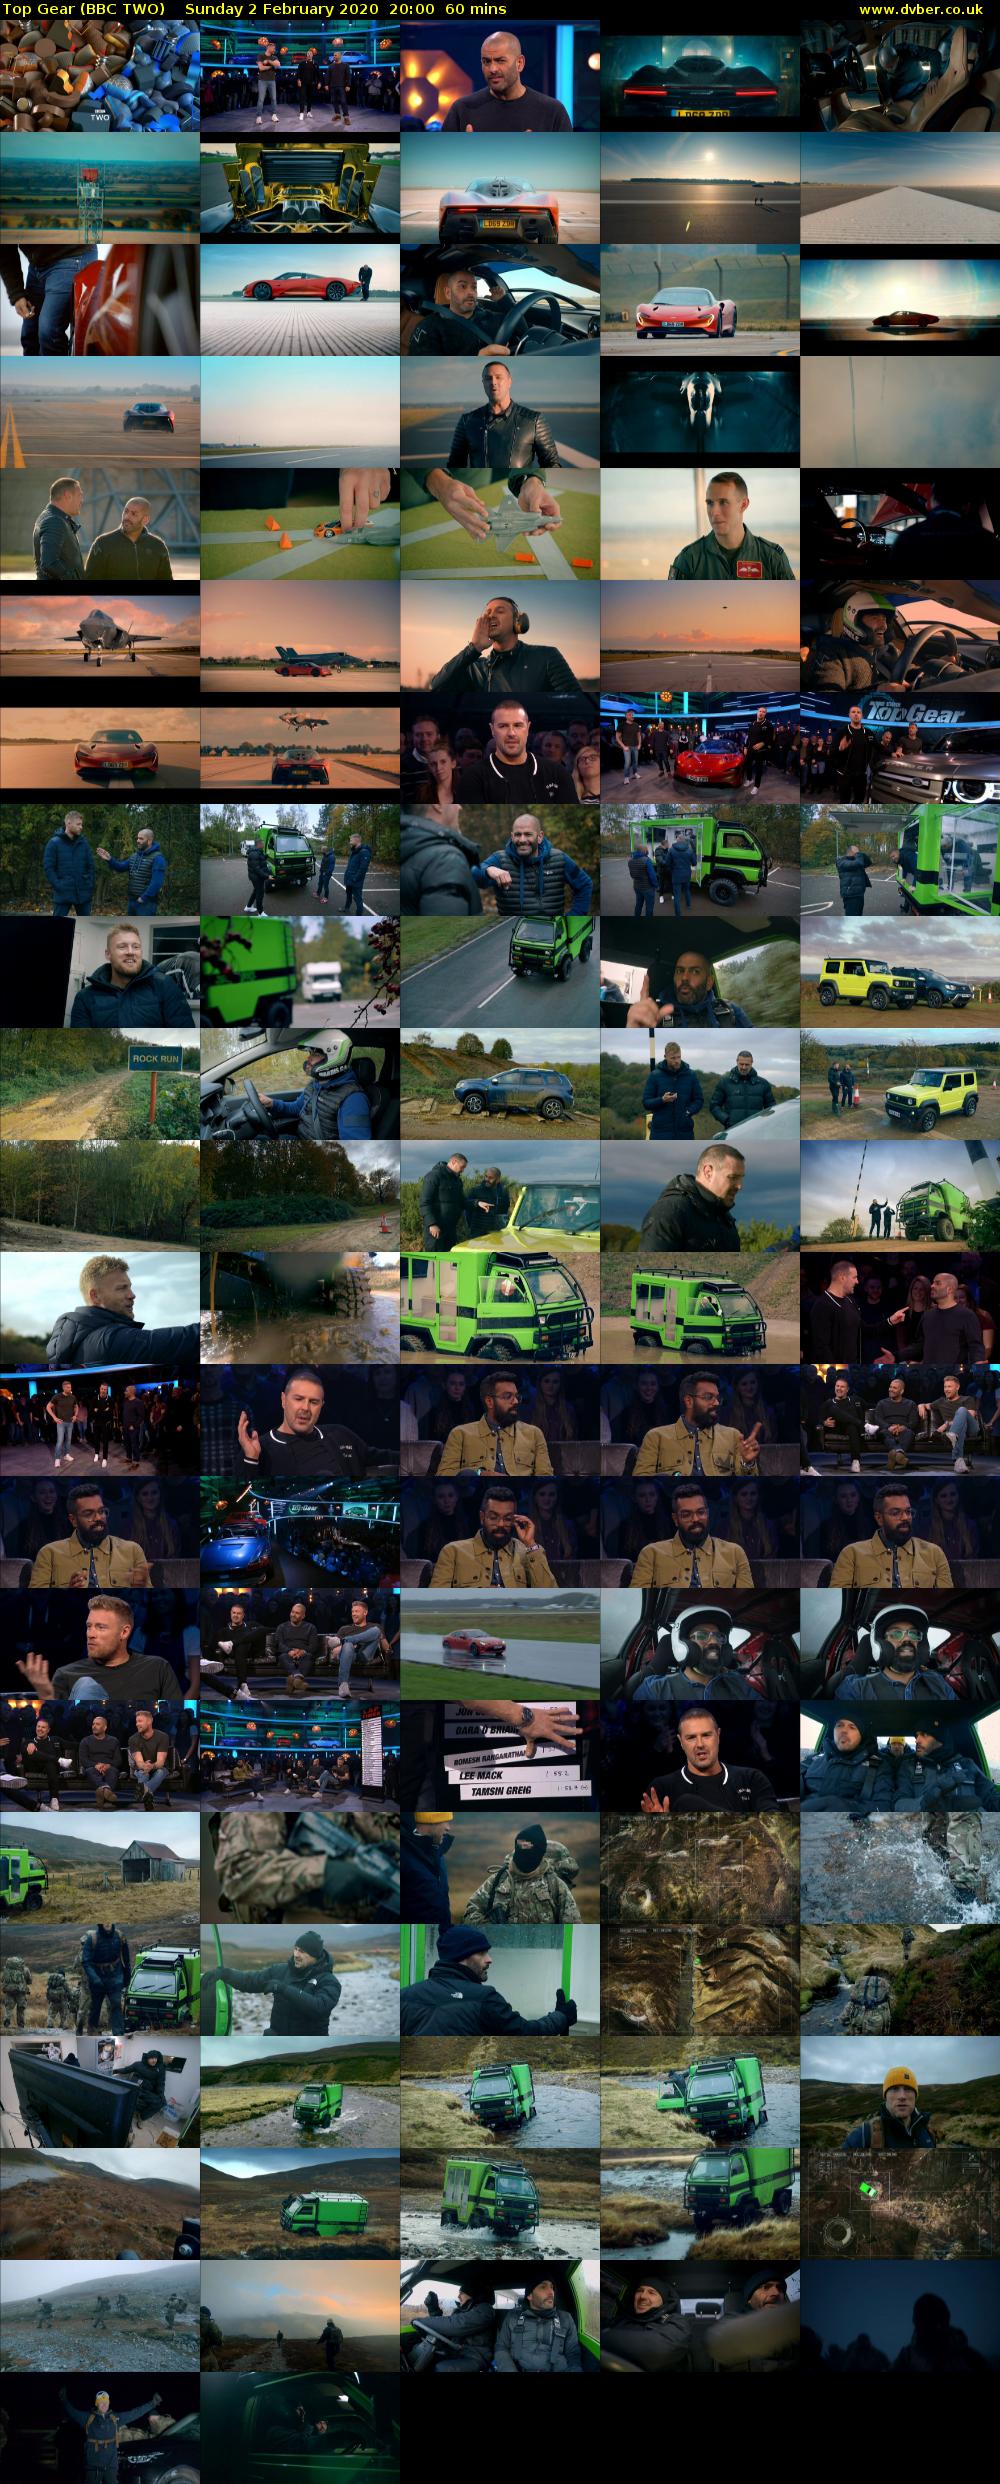 Top Gear (BBC TWO) Sunday 2 February 2020 20:00 - 21:00